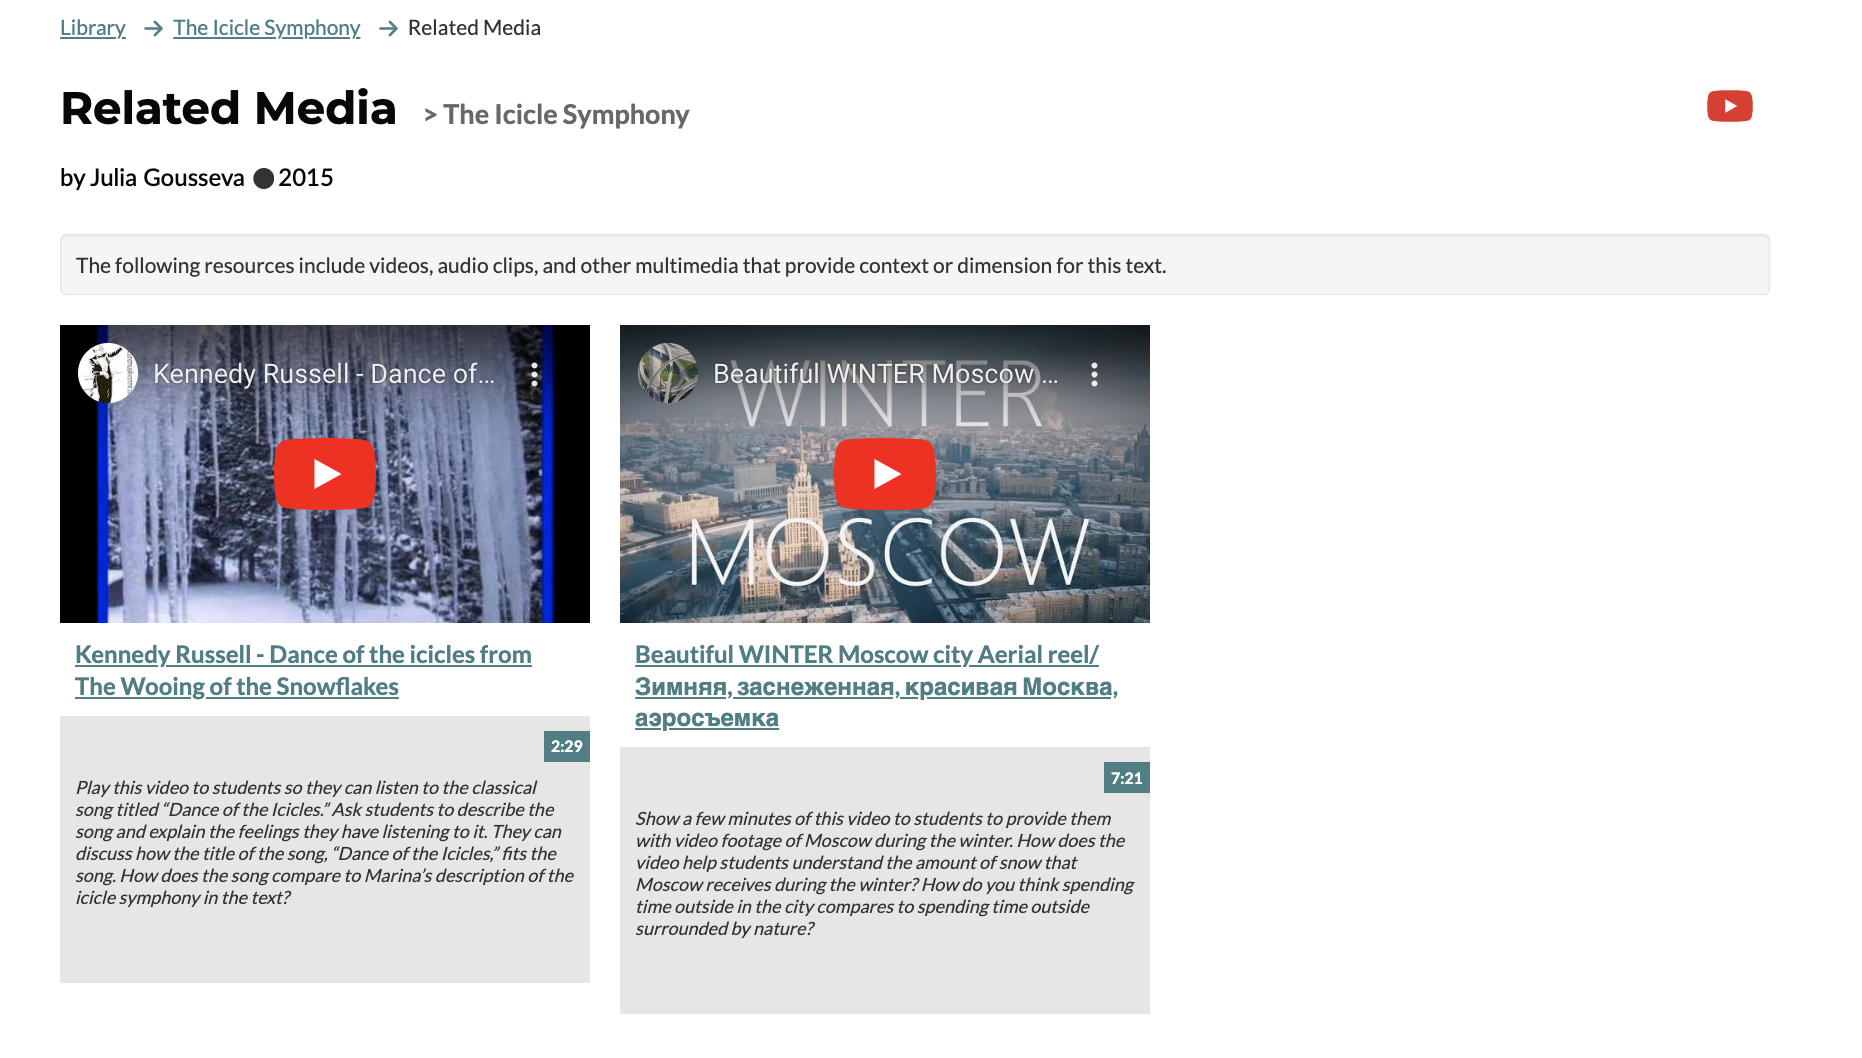 Related Media videos for "The Icicle Symphony" by Julia Gousseva